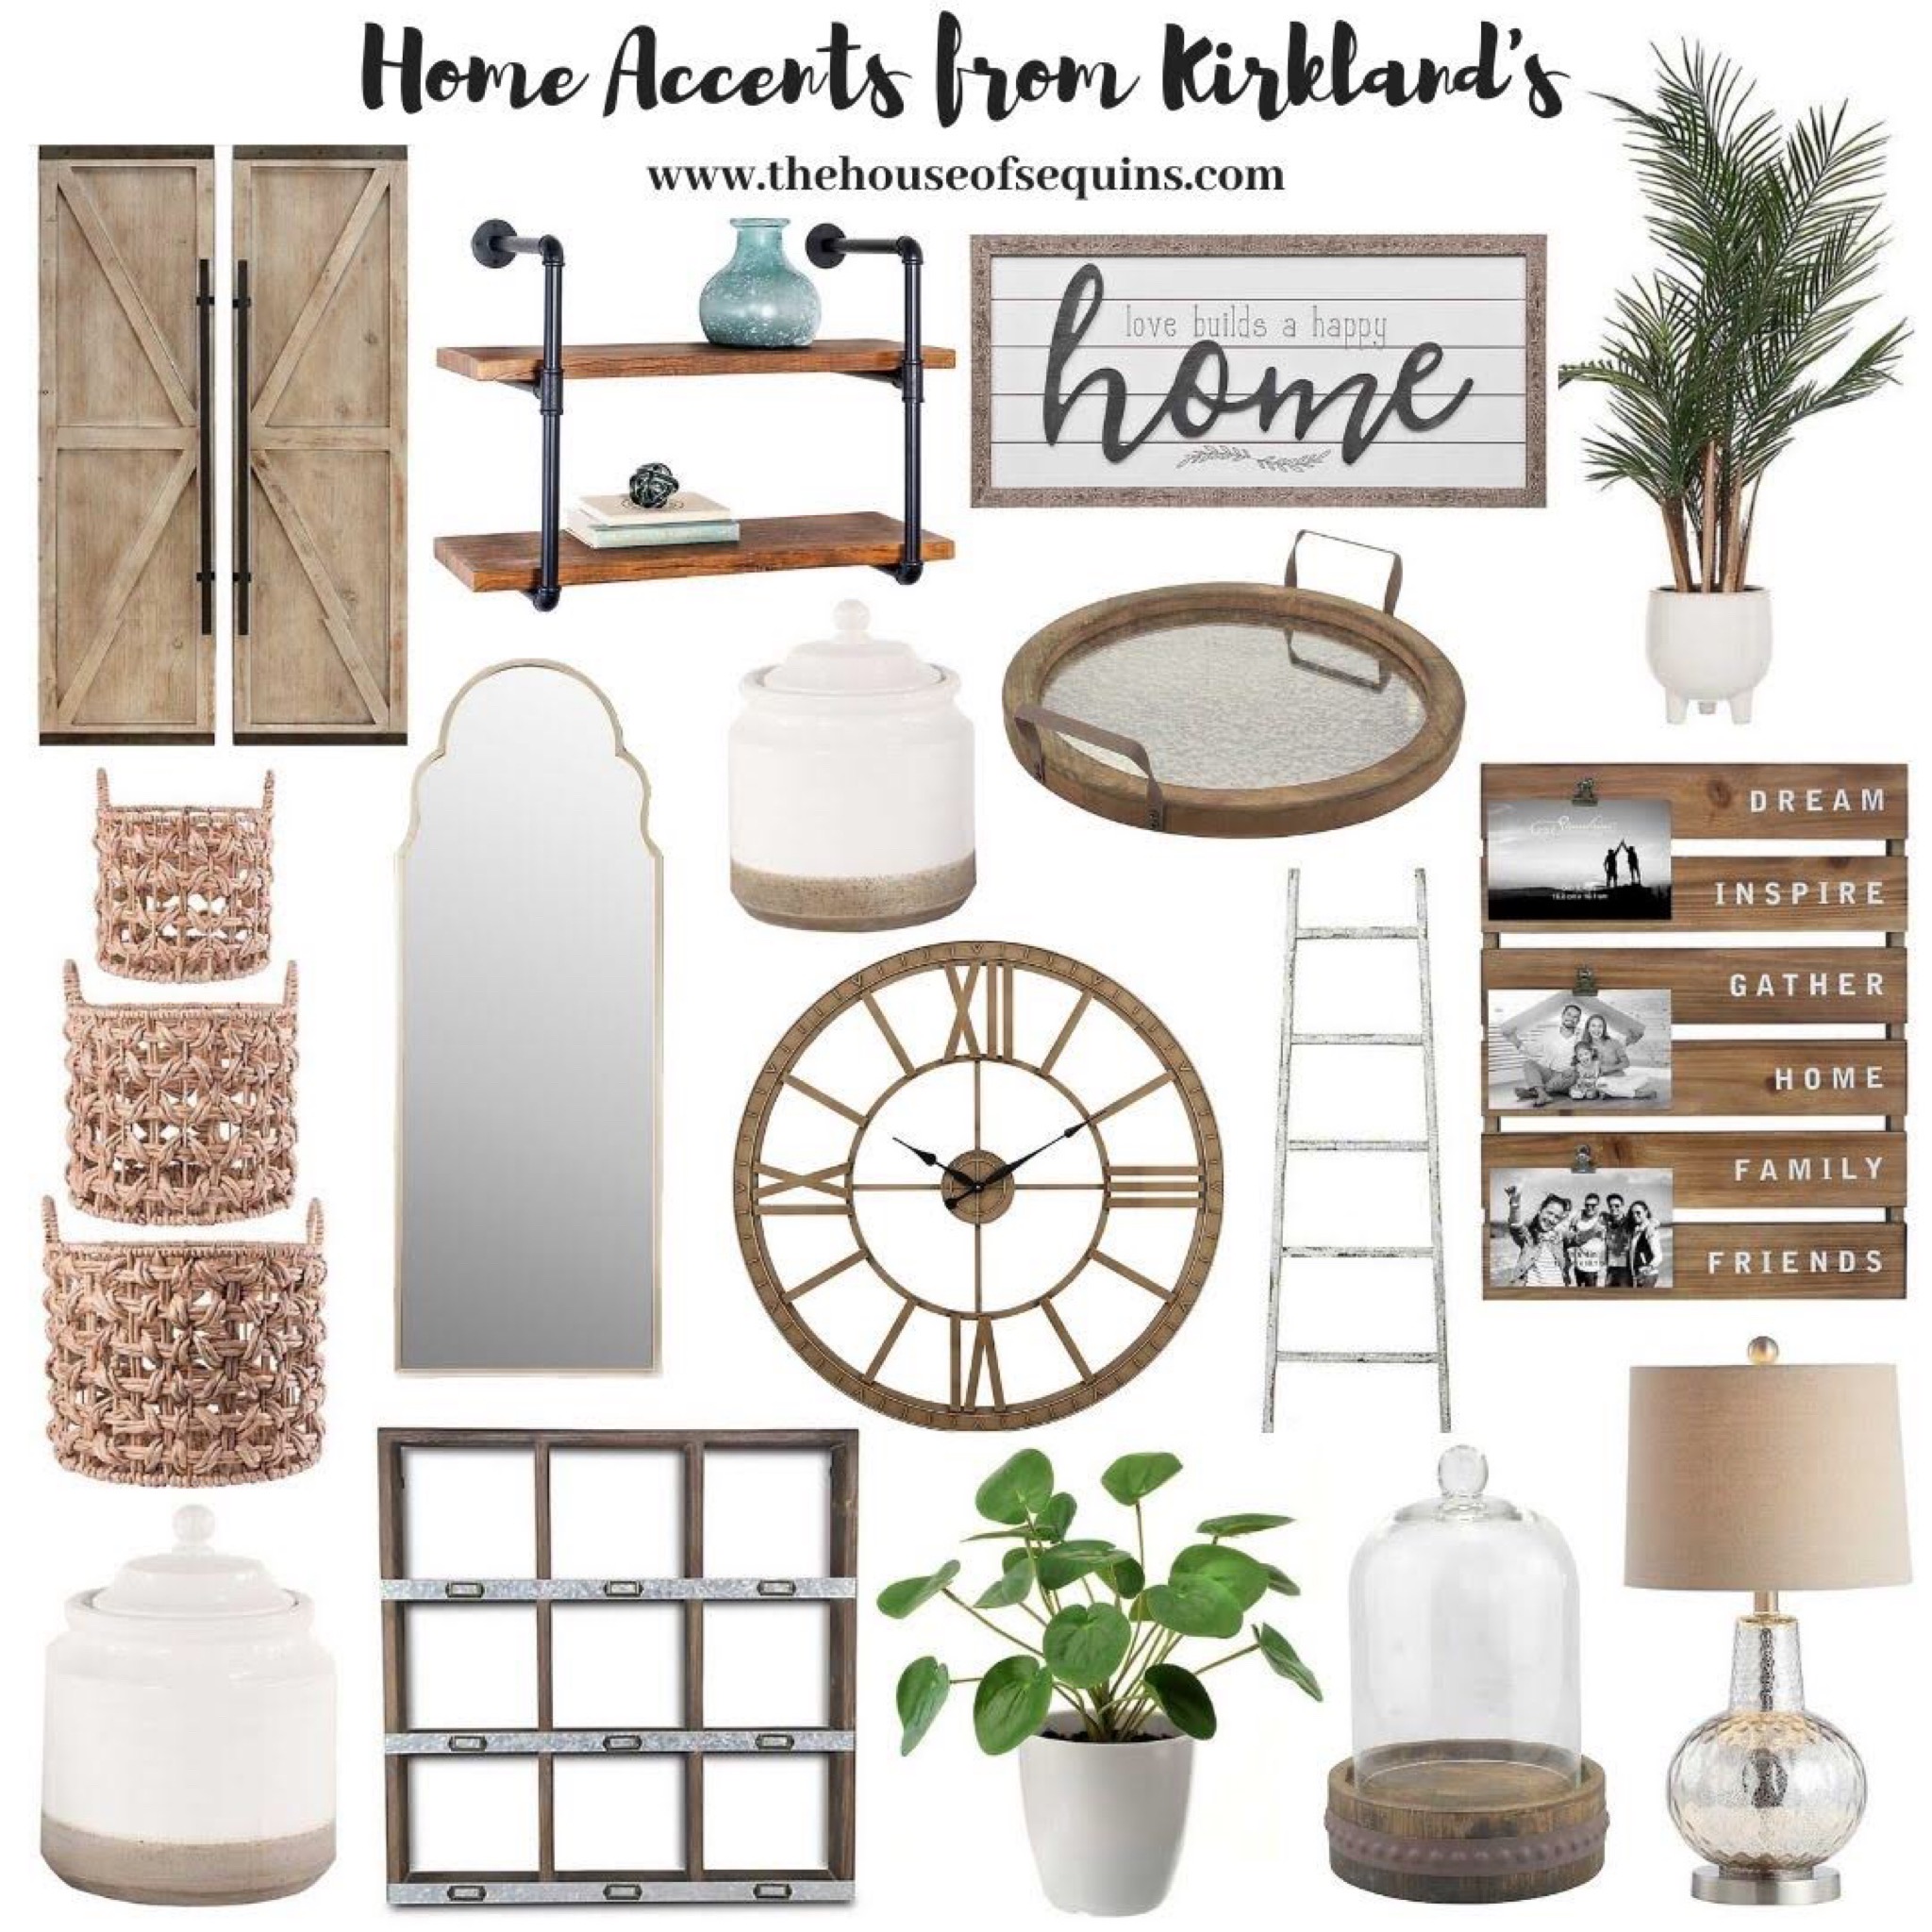 Home Decor from Kirkland's - The House of Sequins